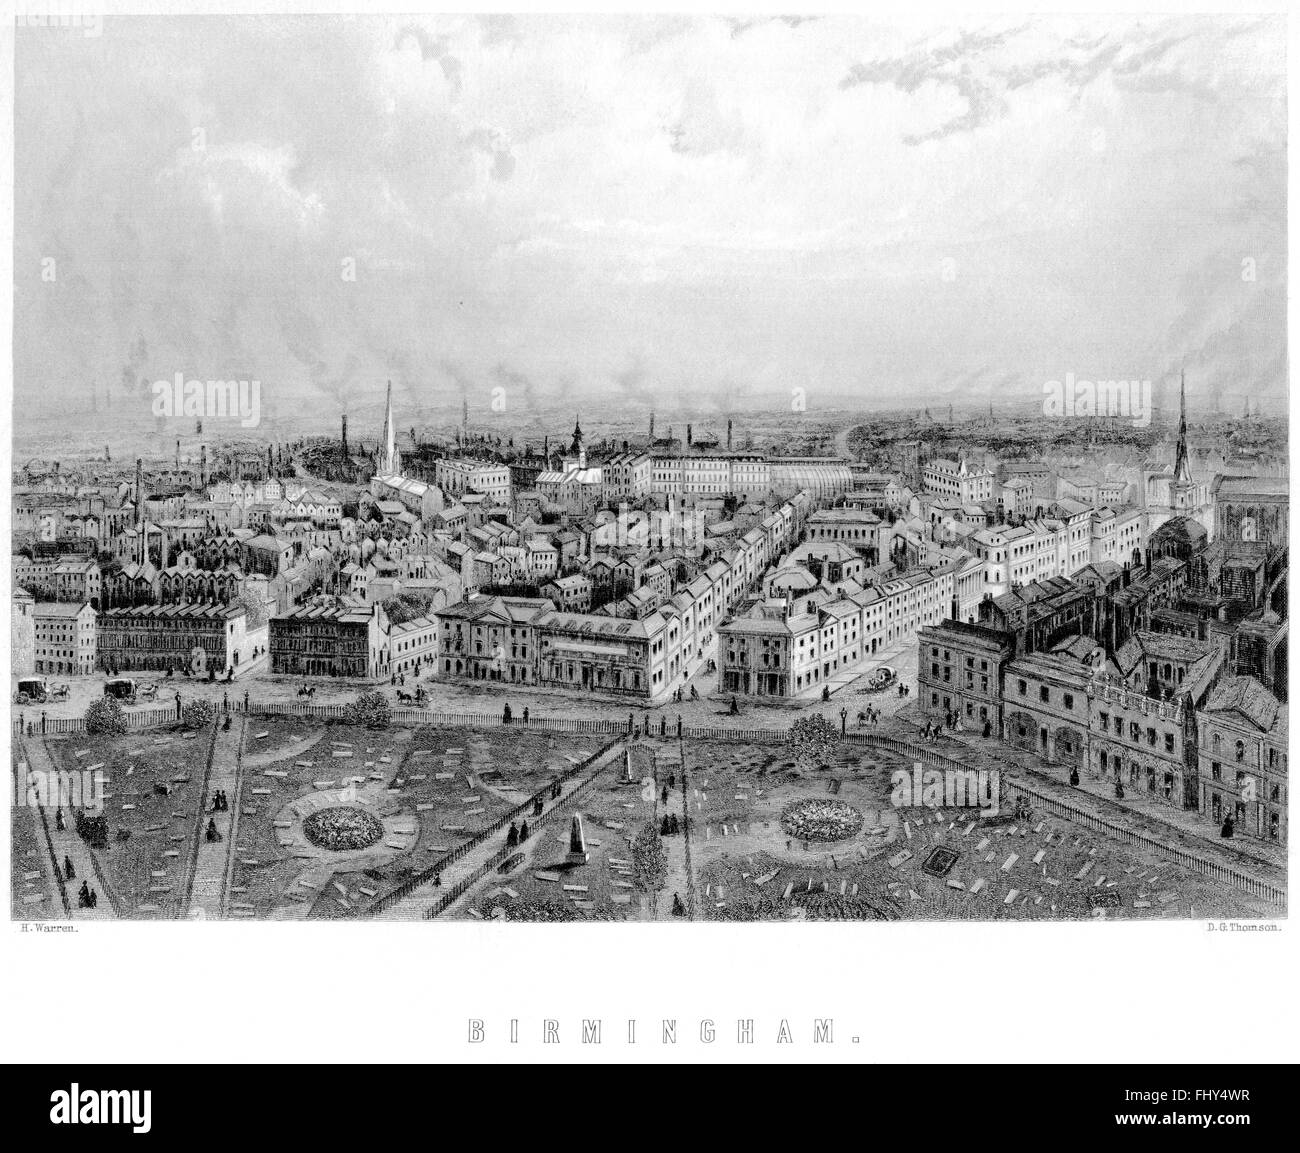 An engraving of Birmingham scanned at high resolution from a book printed in 1880. Believed copyright free. Stock Photo